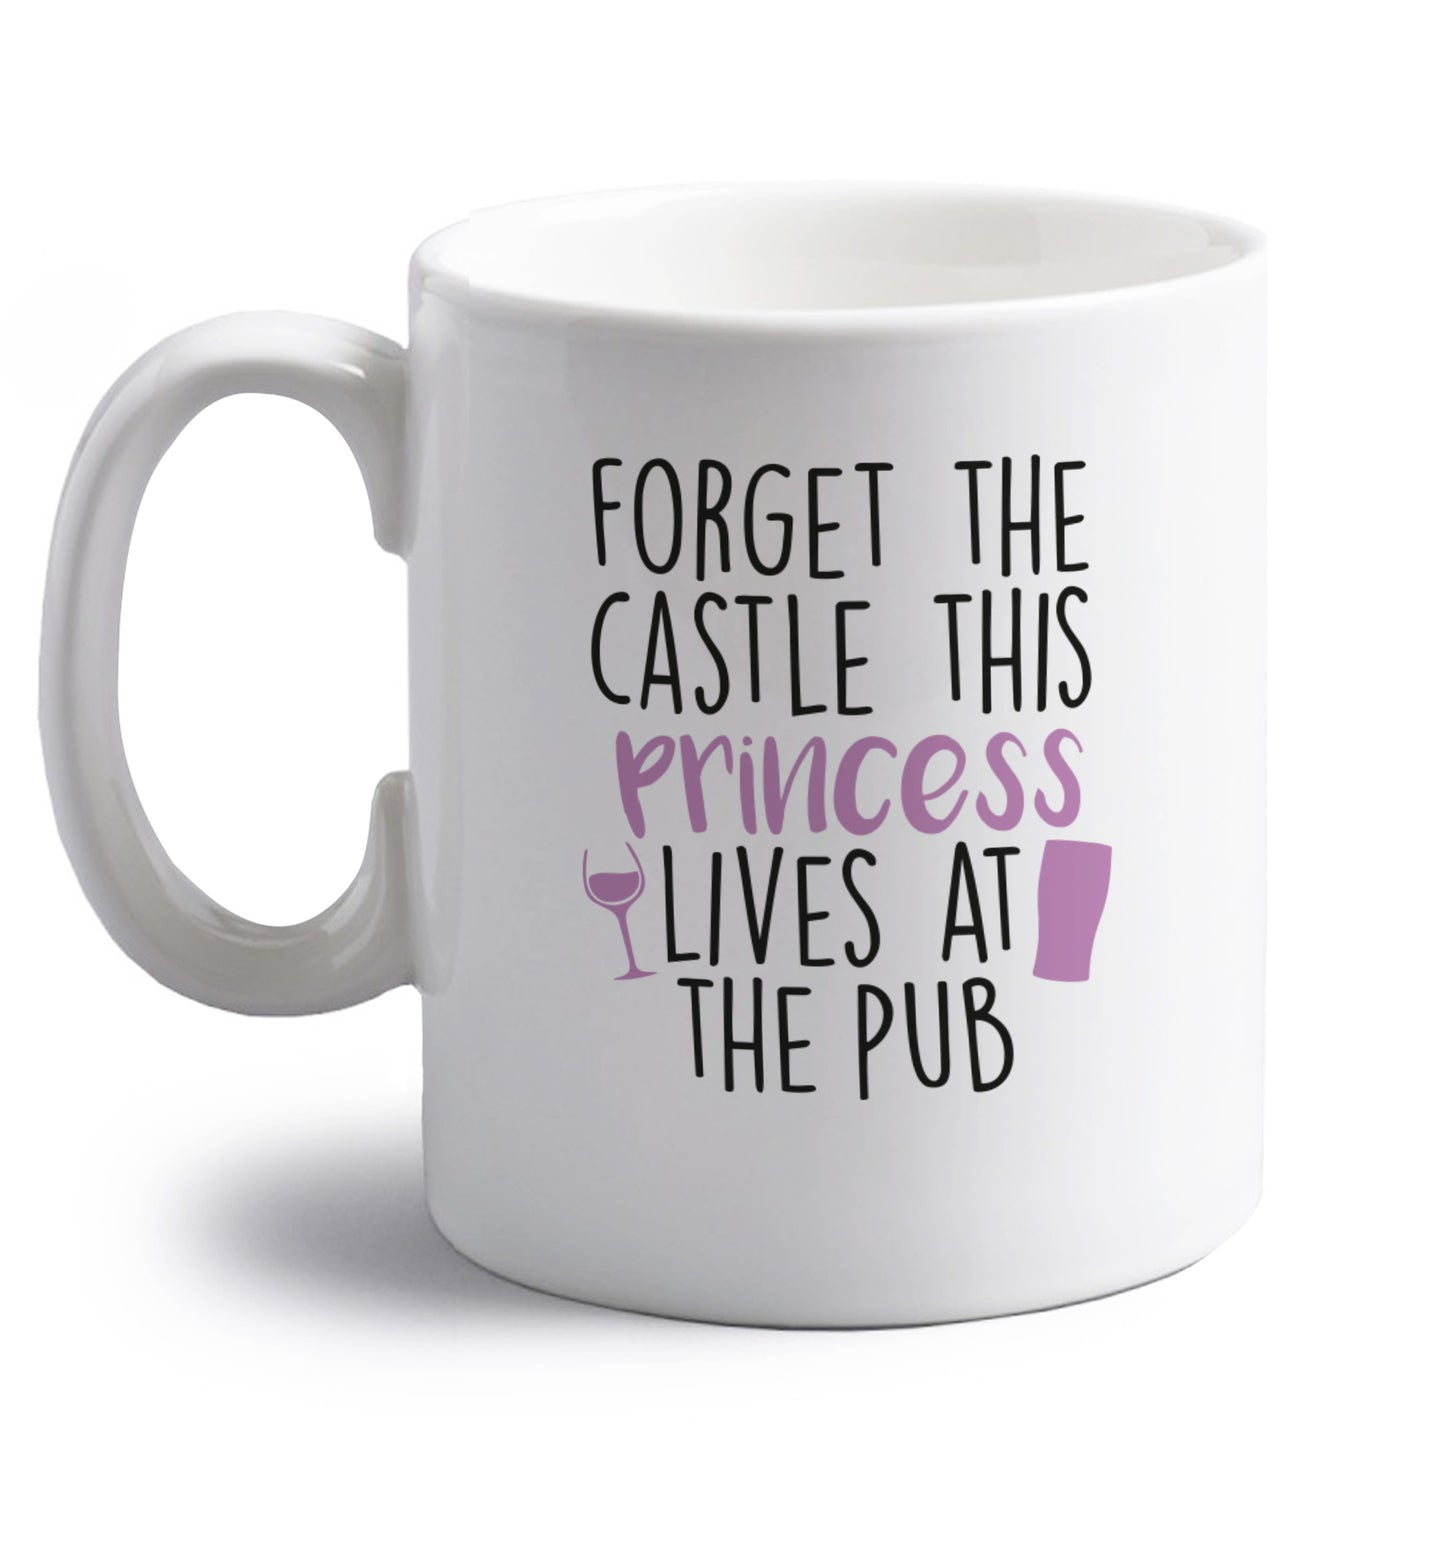 Forget the castle this princess lives at the pub right handed white ceramic mug 